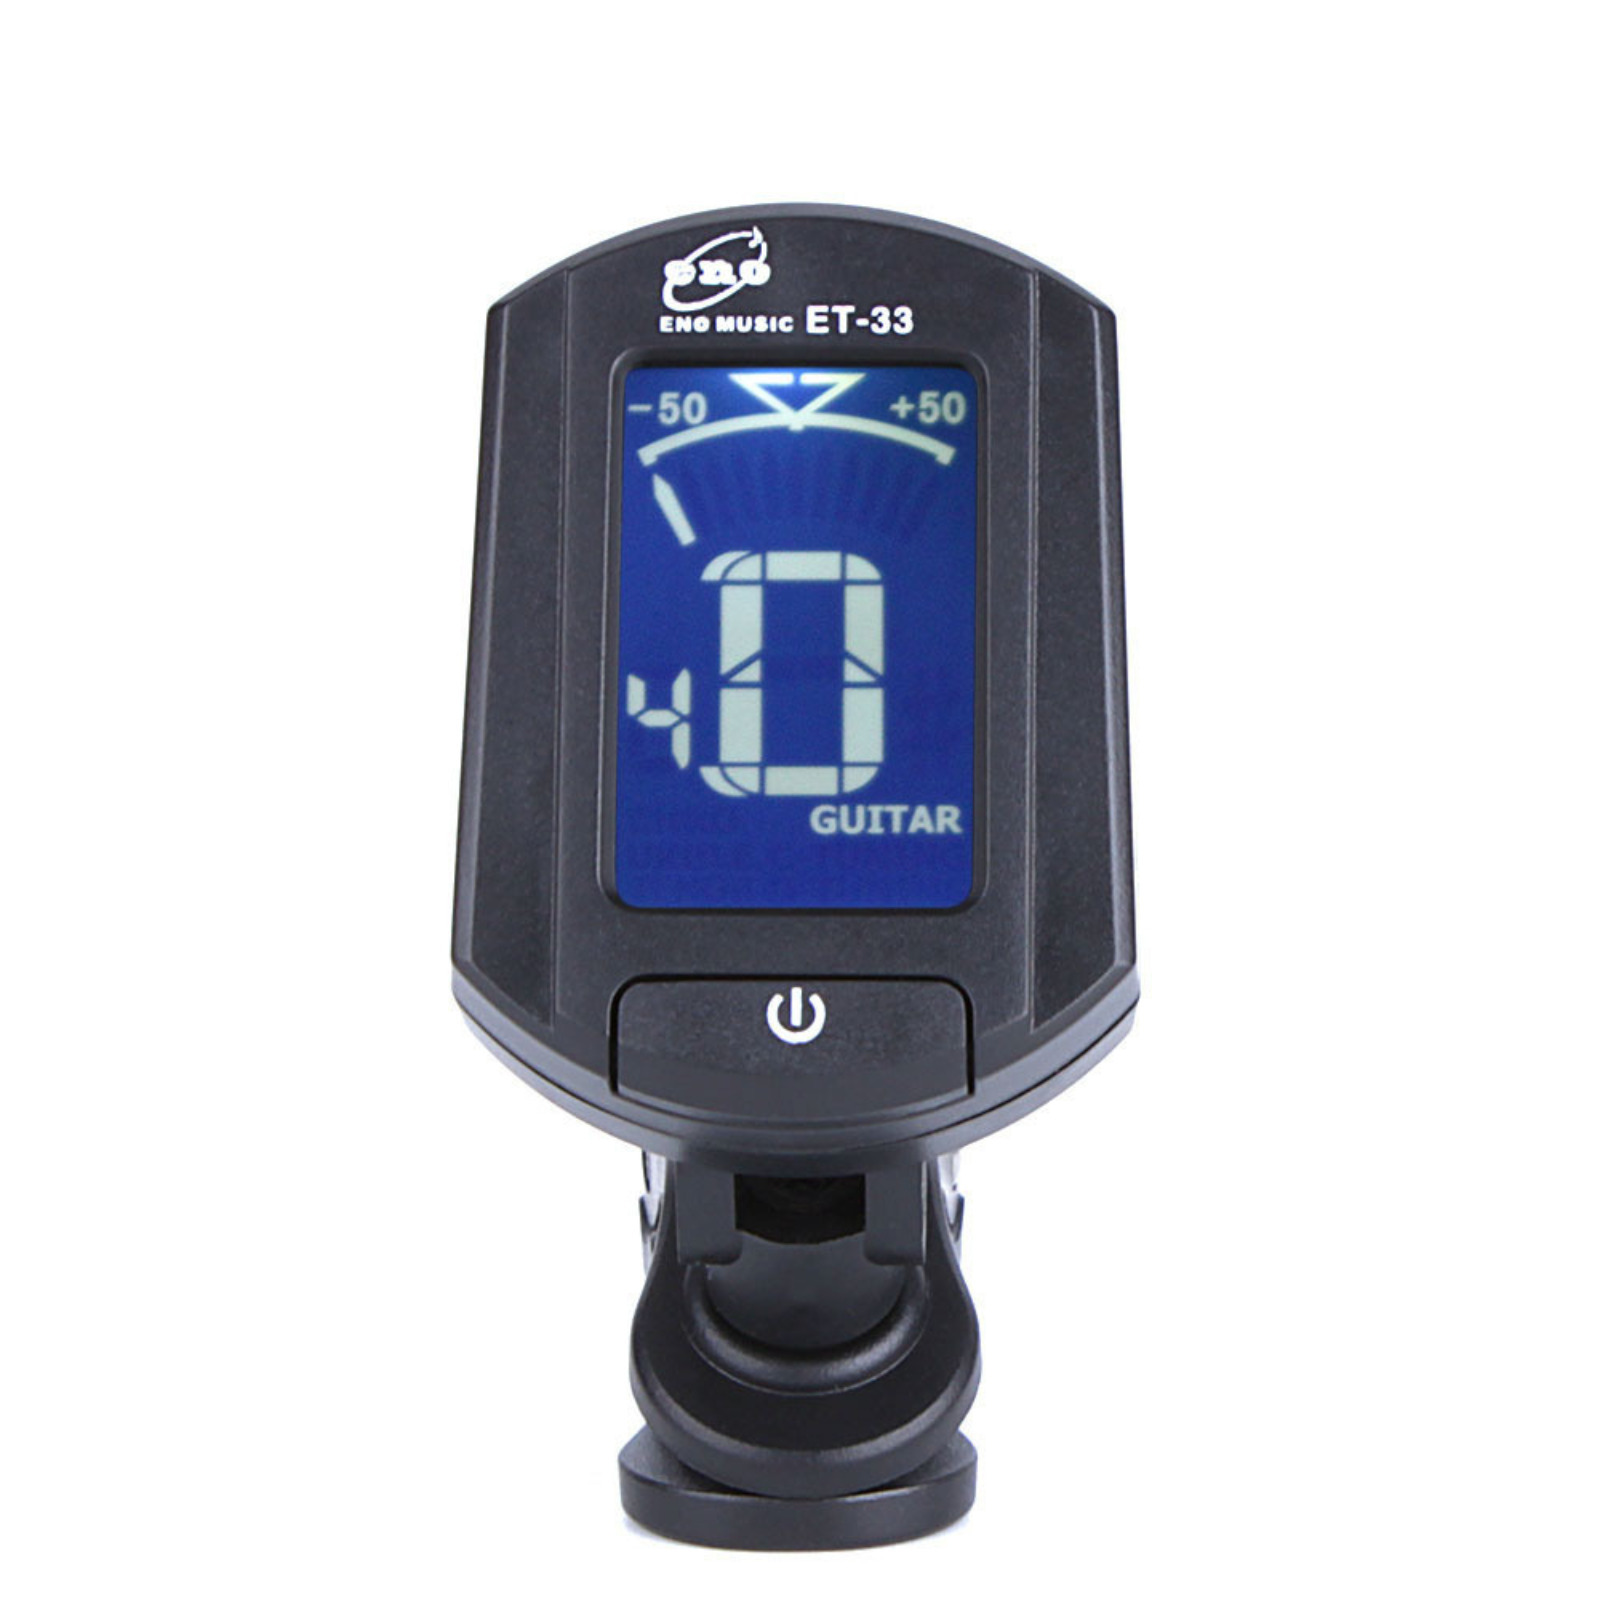 Guitar Tuner 360 degree Rotational Electronic Digital Tuner Easy to Use Highly Accurate Clip-on Tuner Suitable for Acoustic and Electric Guitar Bass Violin Ukulele 